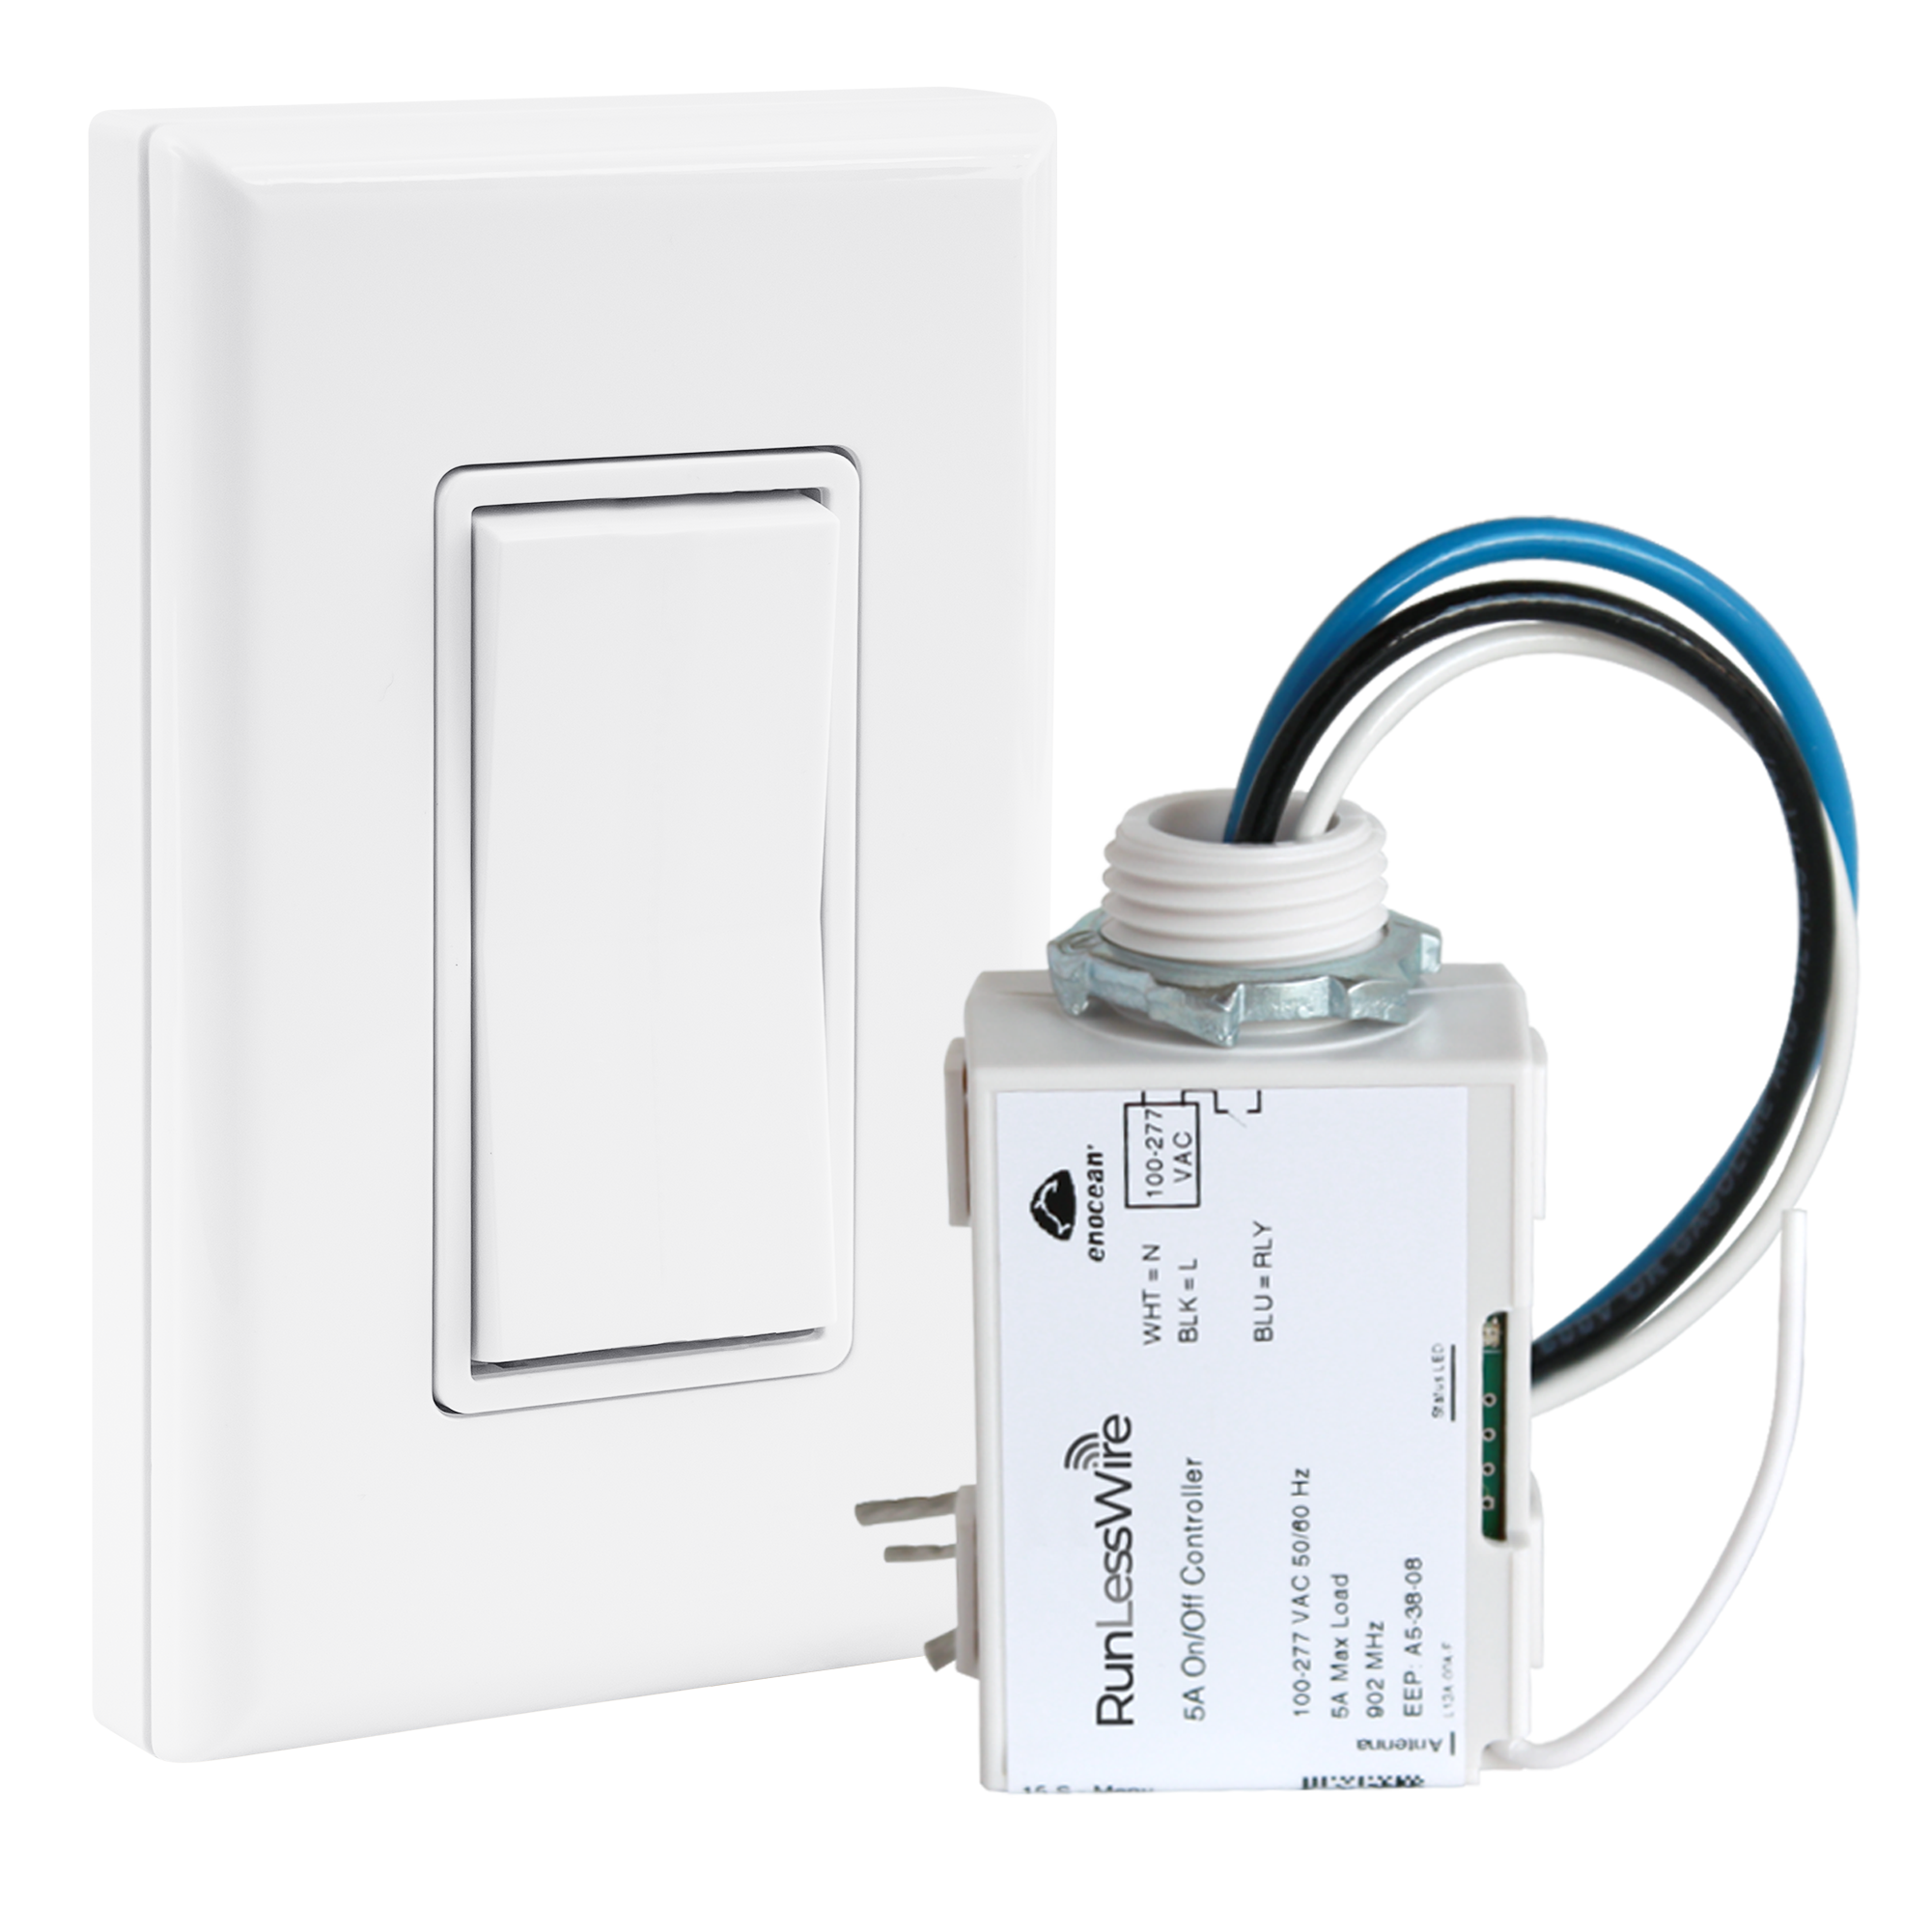 Wireless Light Switch and Receiver Kit, Ortis 300ft RF Range Wireless Wall  Switches for Lights, Fans, Battery Included, No Wiring Needed 